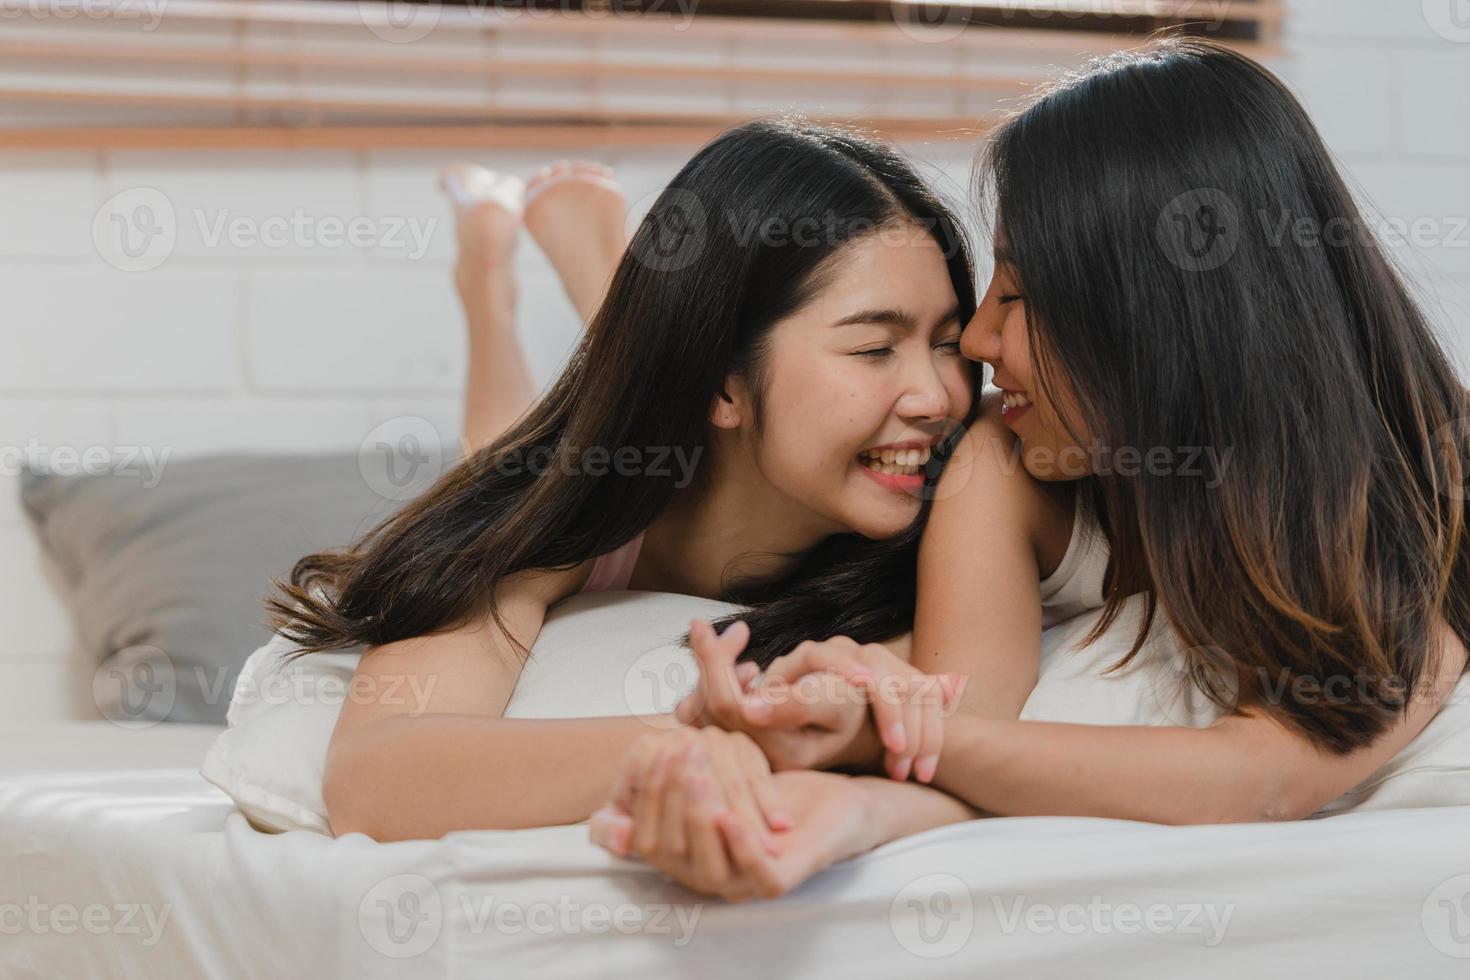 Asian Lesbian lgbtq women couple kiss and hug on bed at home. Young Asia lover female happy relax rest together spend romantic time after wake up in bedroom at home in the morning concept. photo